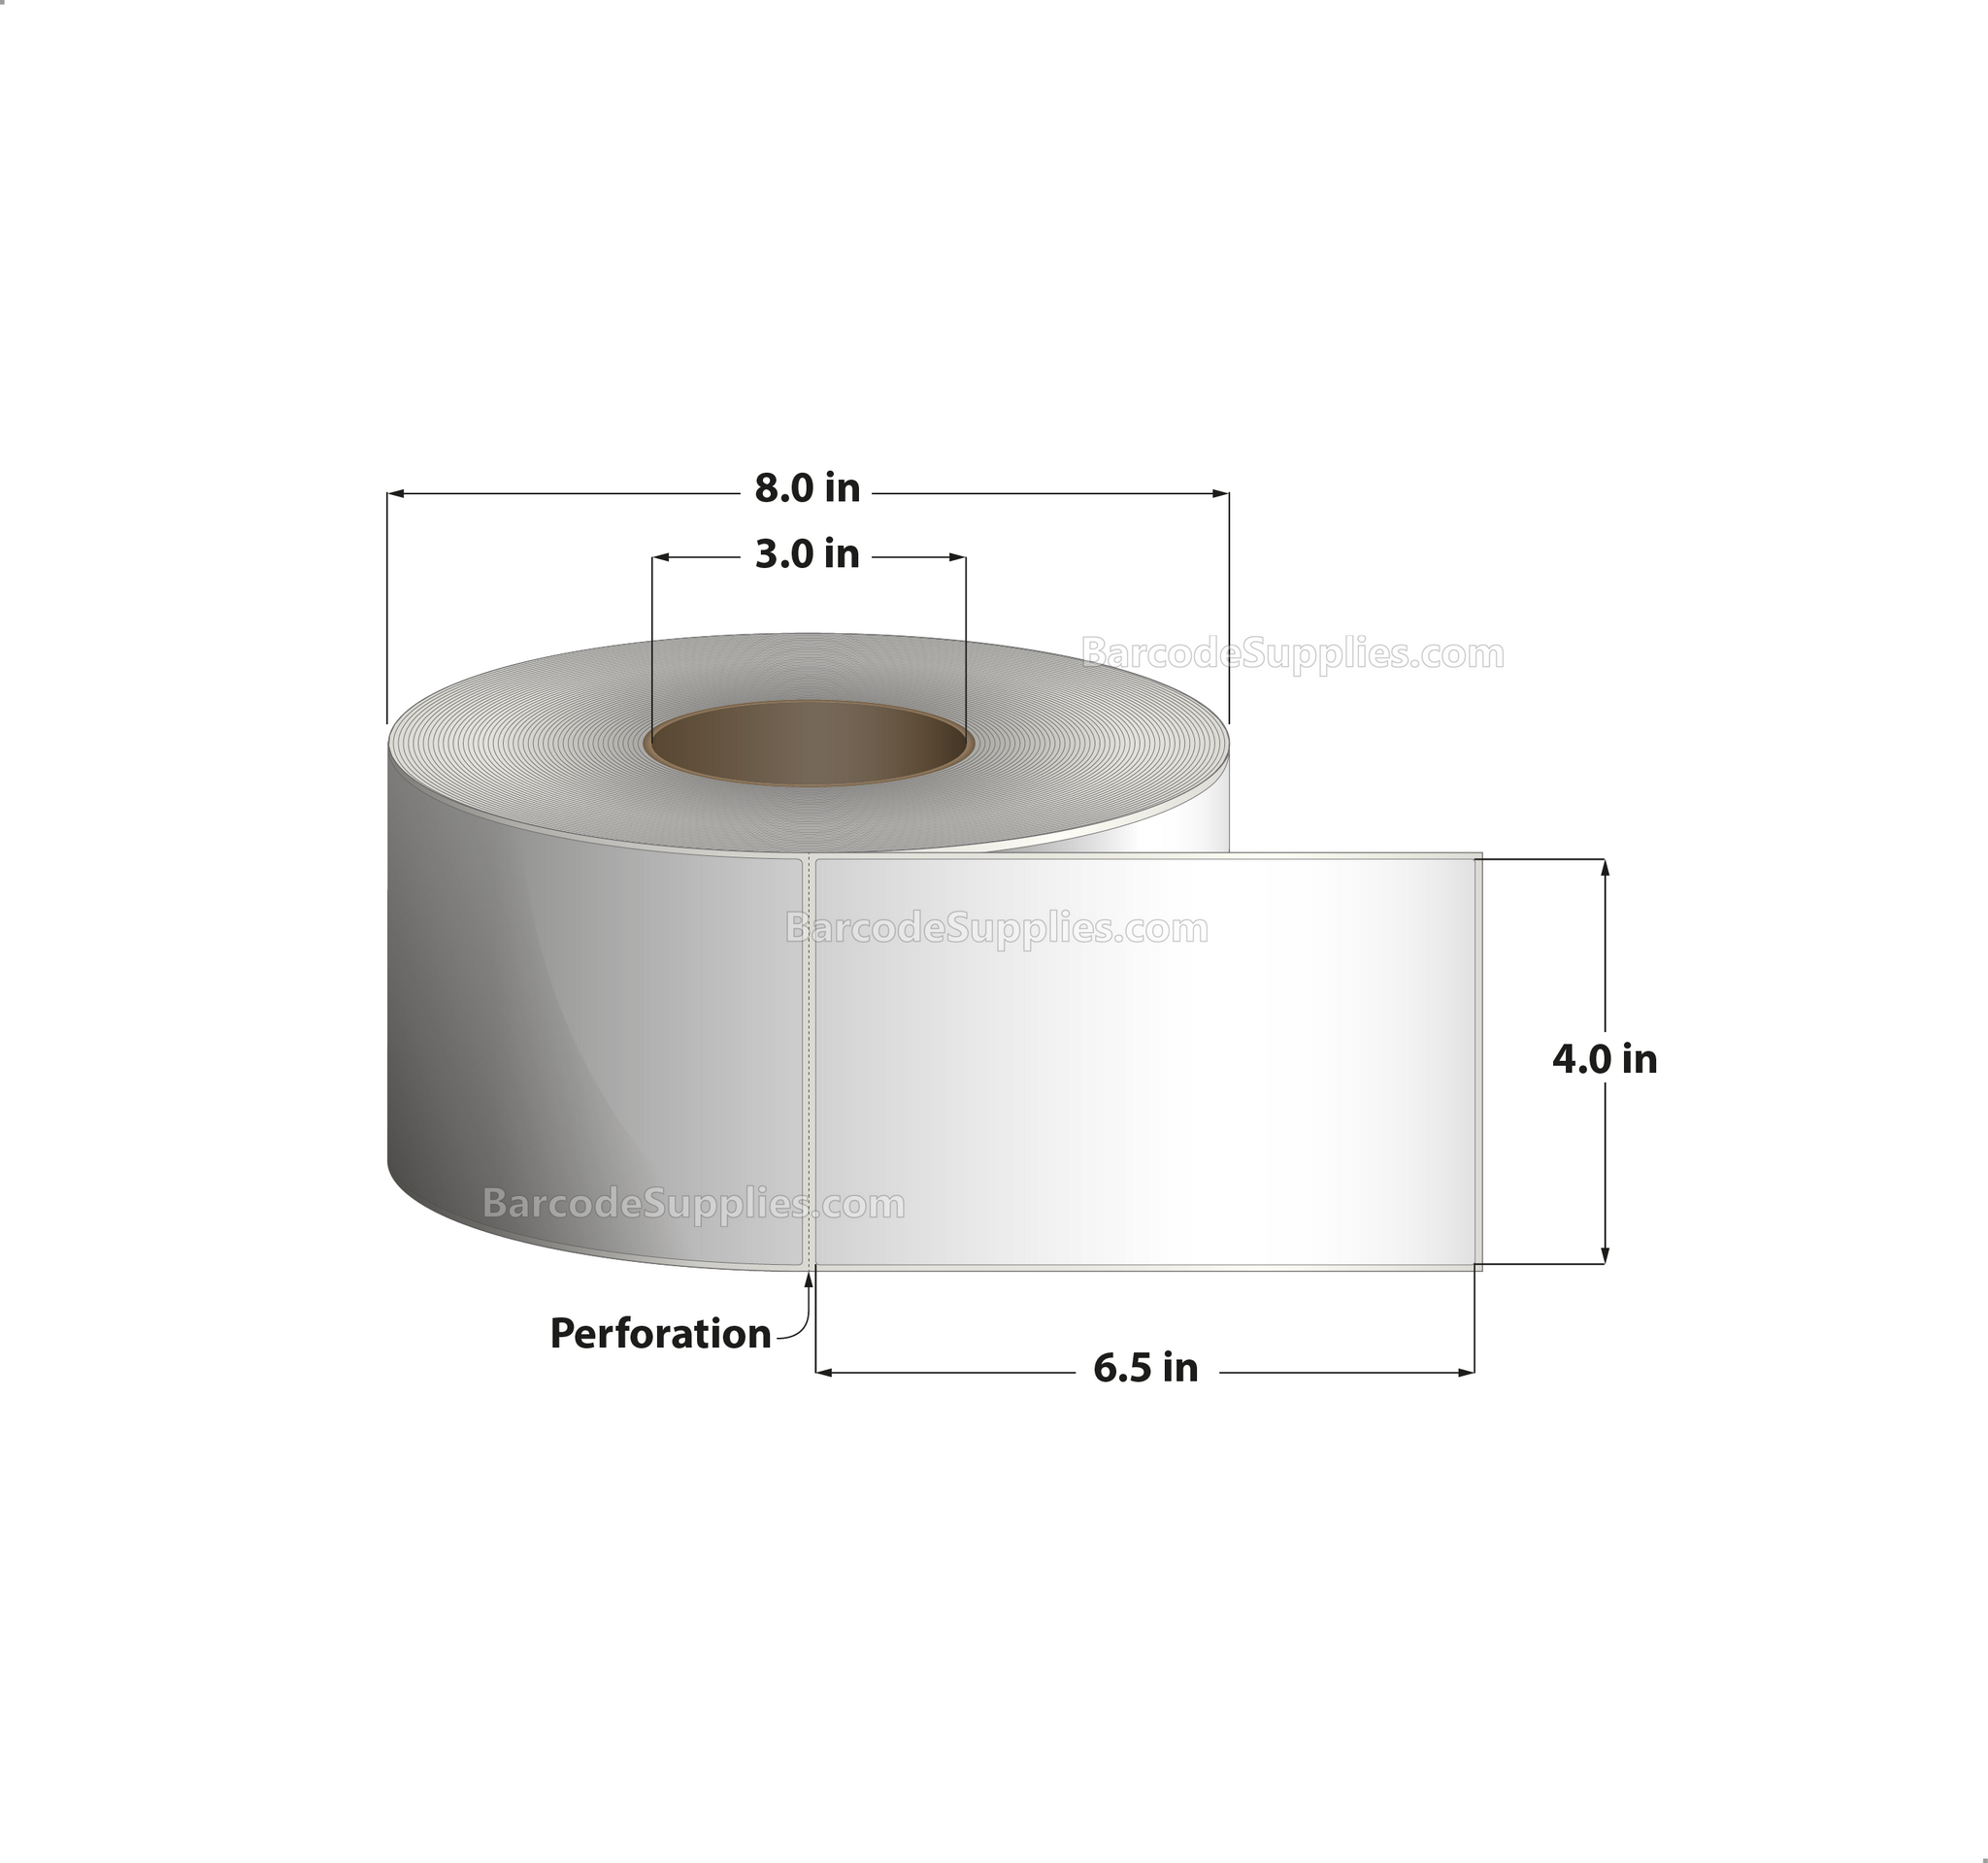 4 x 6.5 Direct Thermal White Labels With Acrylic Adhesive - Perforated - 900 Labels Per Roll - Carton Of 4 Rolls - 3600 Labels Total - MPN: RD-4-65-900-3 - BarcodeSource, Inc.